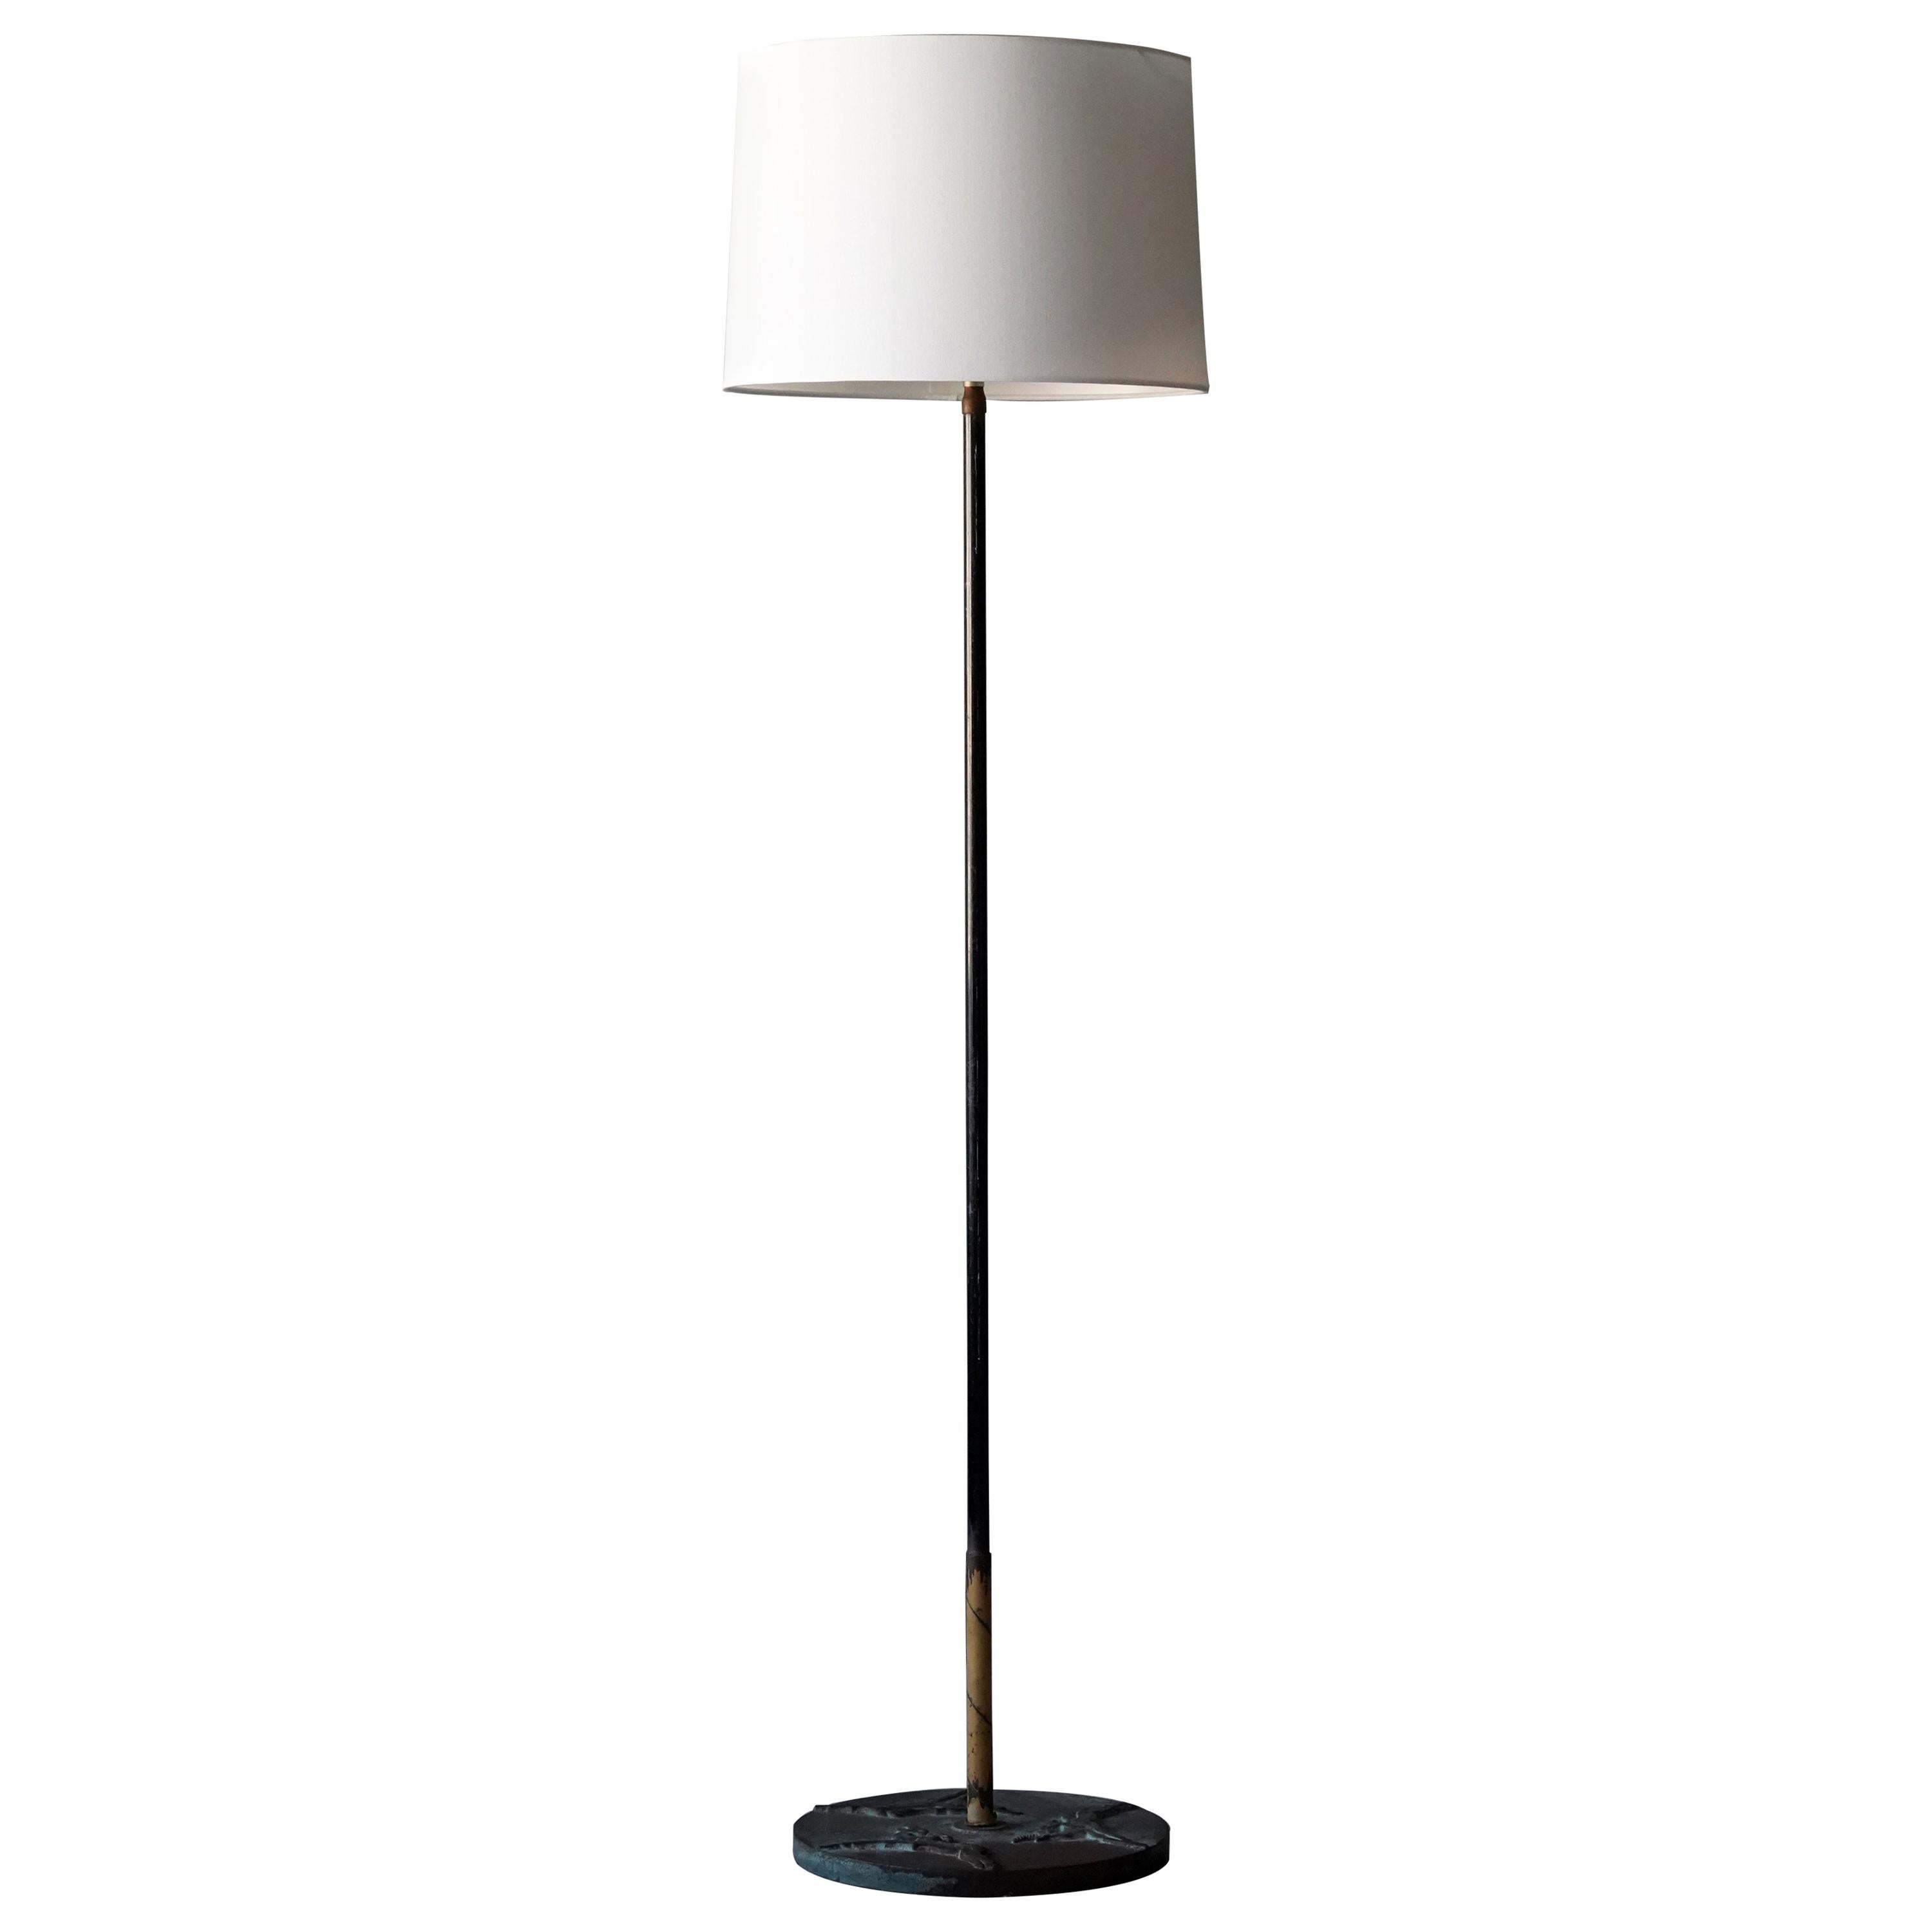 A Swedish floor lamp. Designed and produced in the 1940s. Features painted tubular steel, base in cast bronze featuring highly stylized motifs.

Lampshade is not included in purchase. Stated dimensions exclude lampshade.

Other designers of the